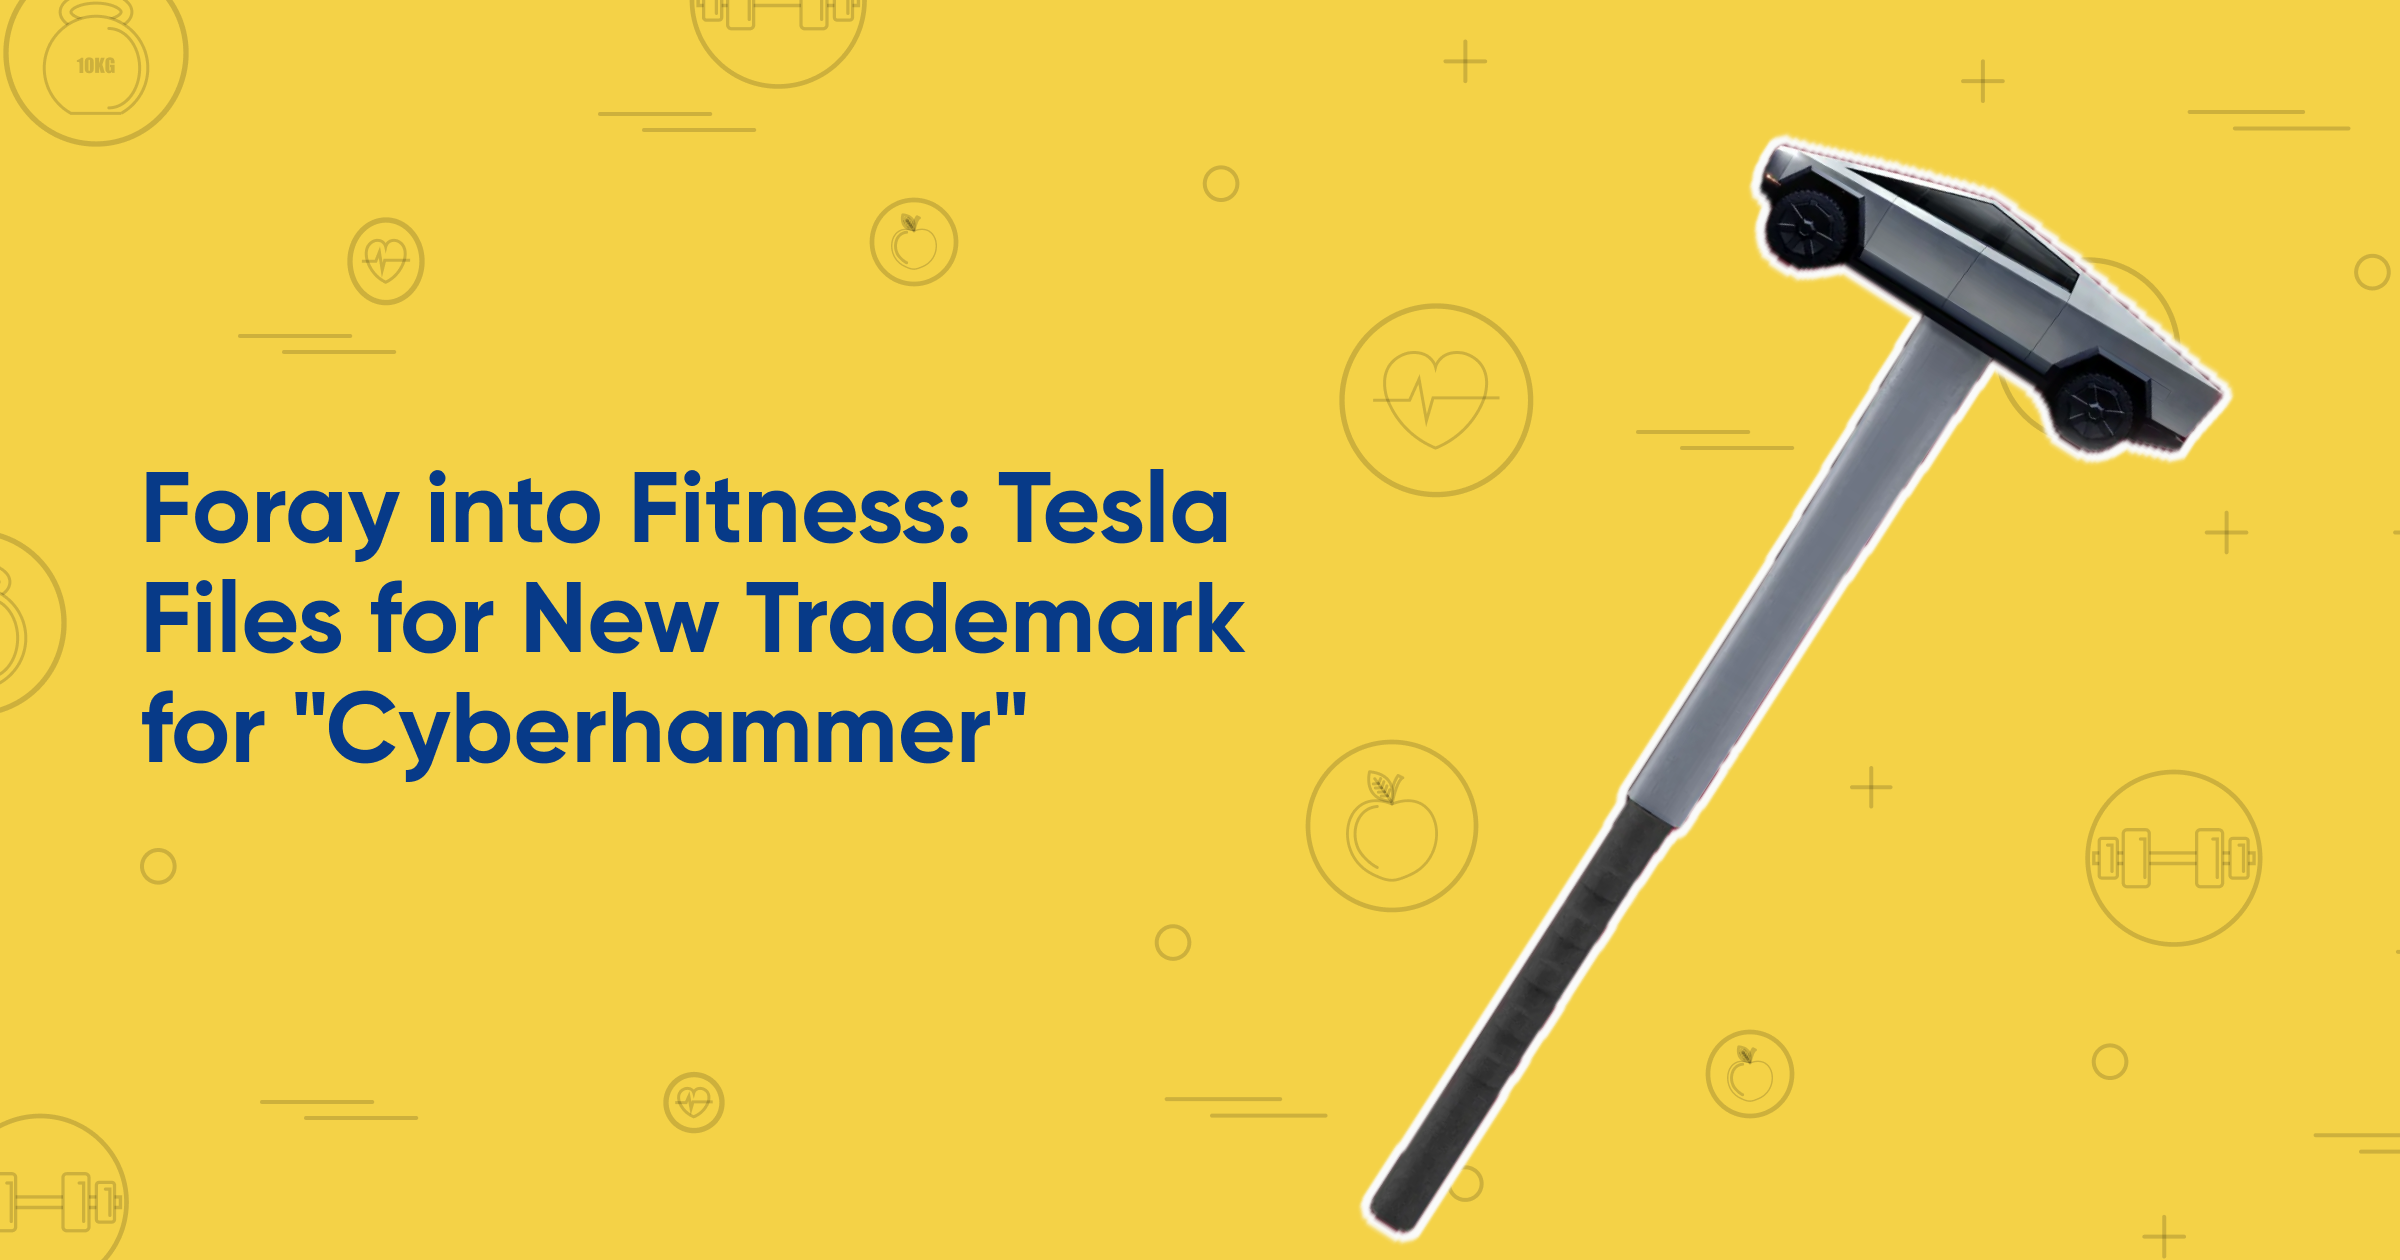 Foray into Fitness: Tesla Files for New Trademark for "Cyberhammer"